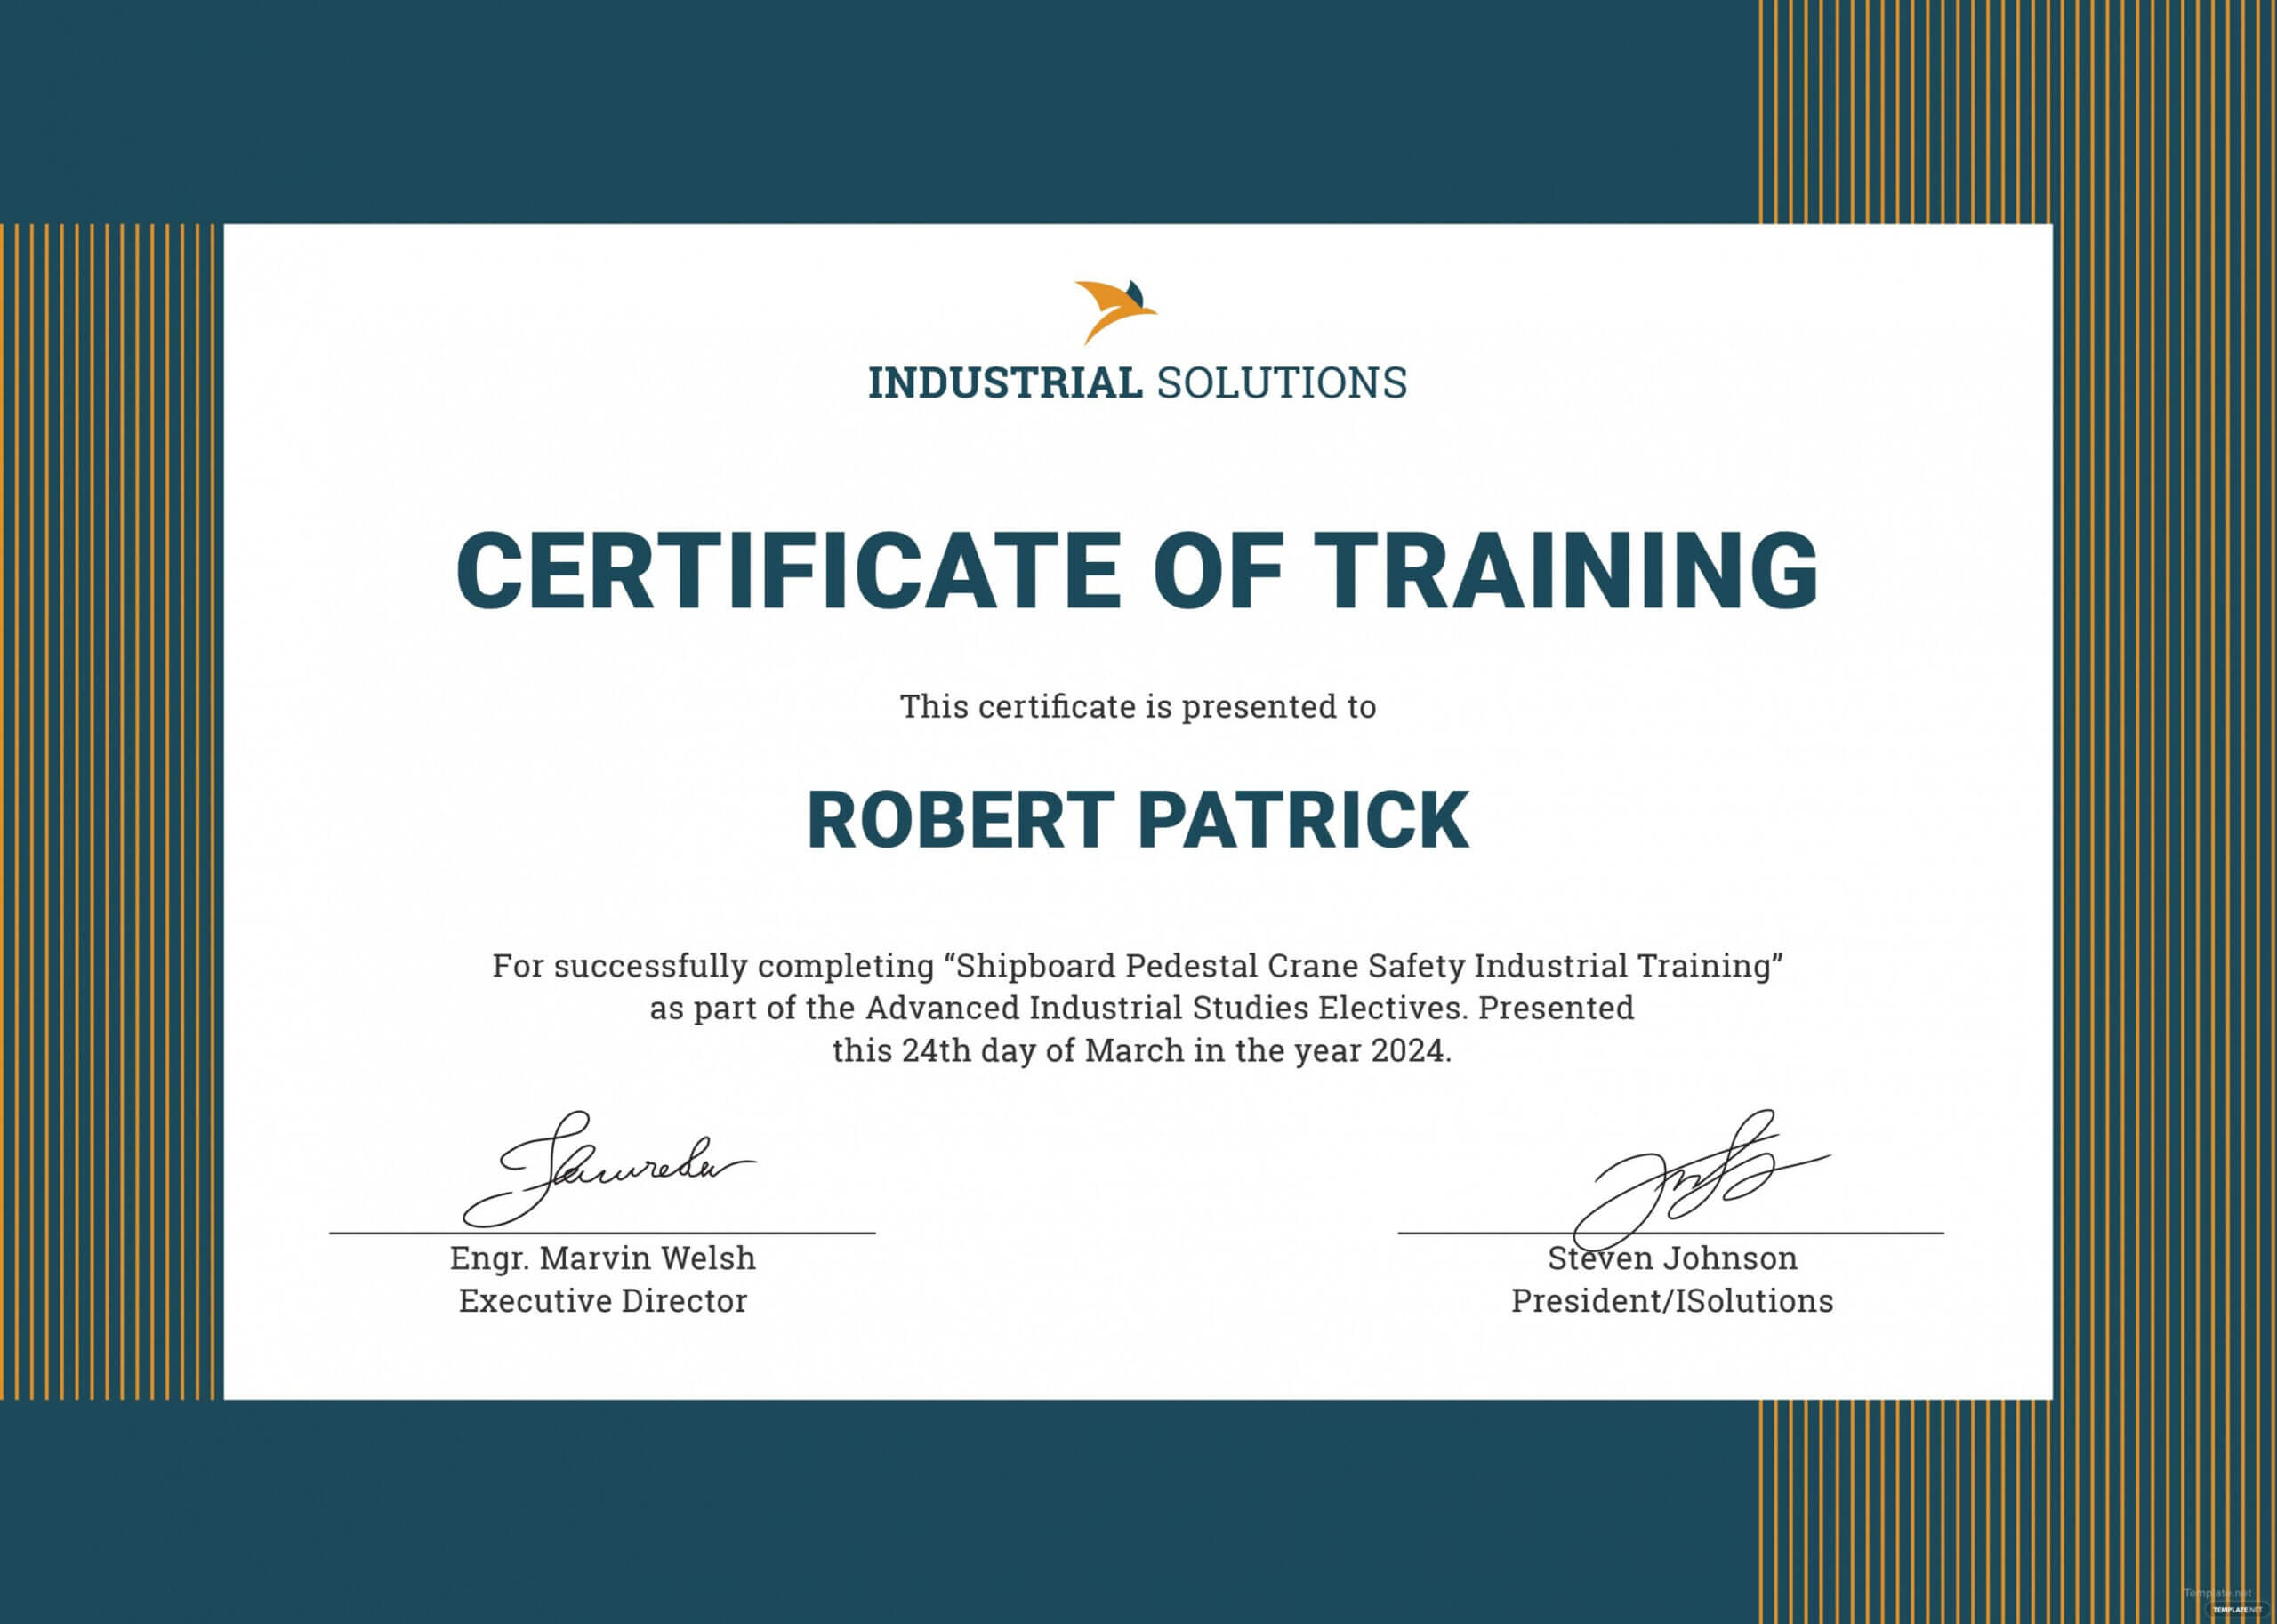 Training Certificate Samples Kleostickenco Safety Training With Regard To Template For Training Certificate